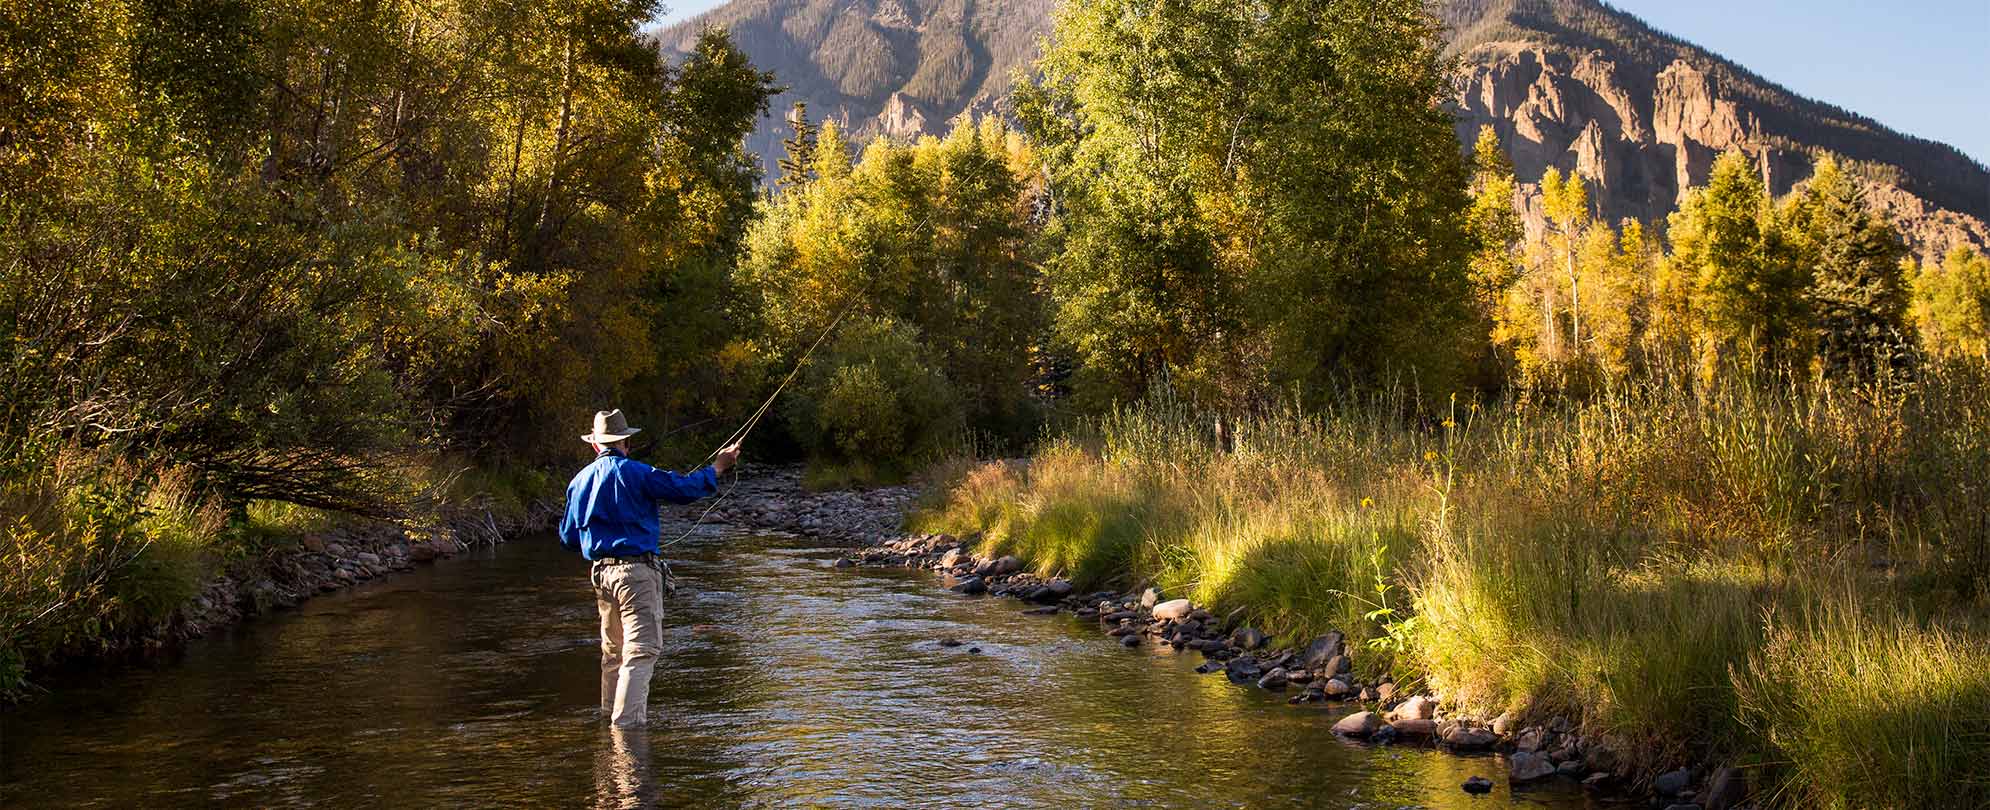 A man stands fishing in a stream, the mountains of Pagosa Springs, Colorado in the distance.